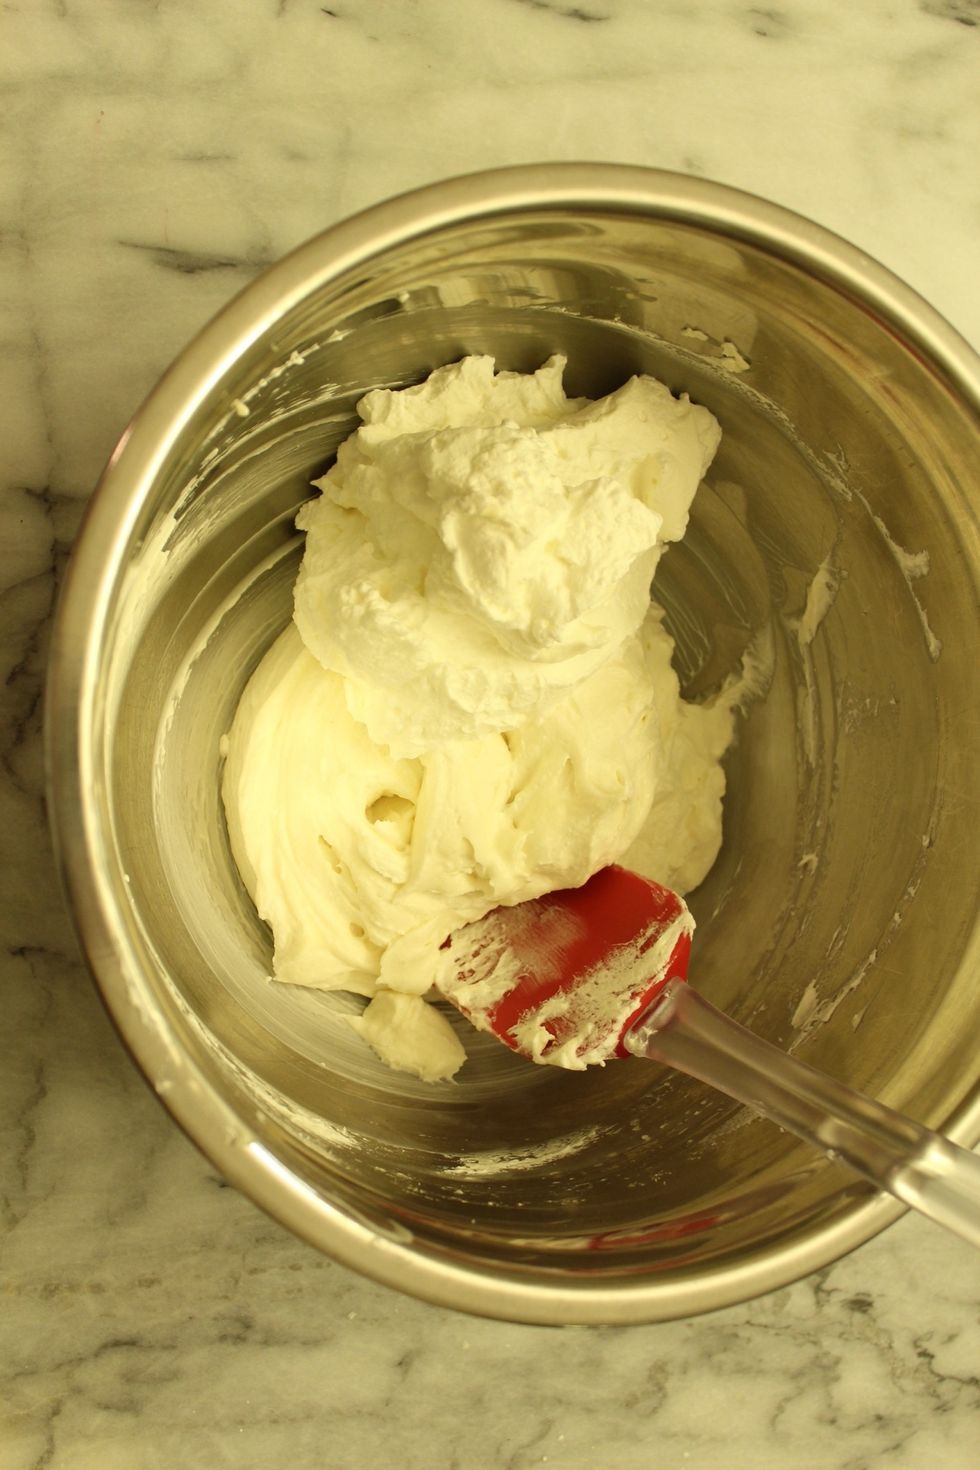 Gently but thoroughly fold the whipping cream into your cream cheese mixture.